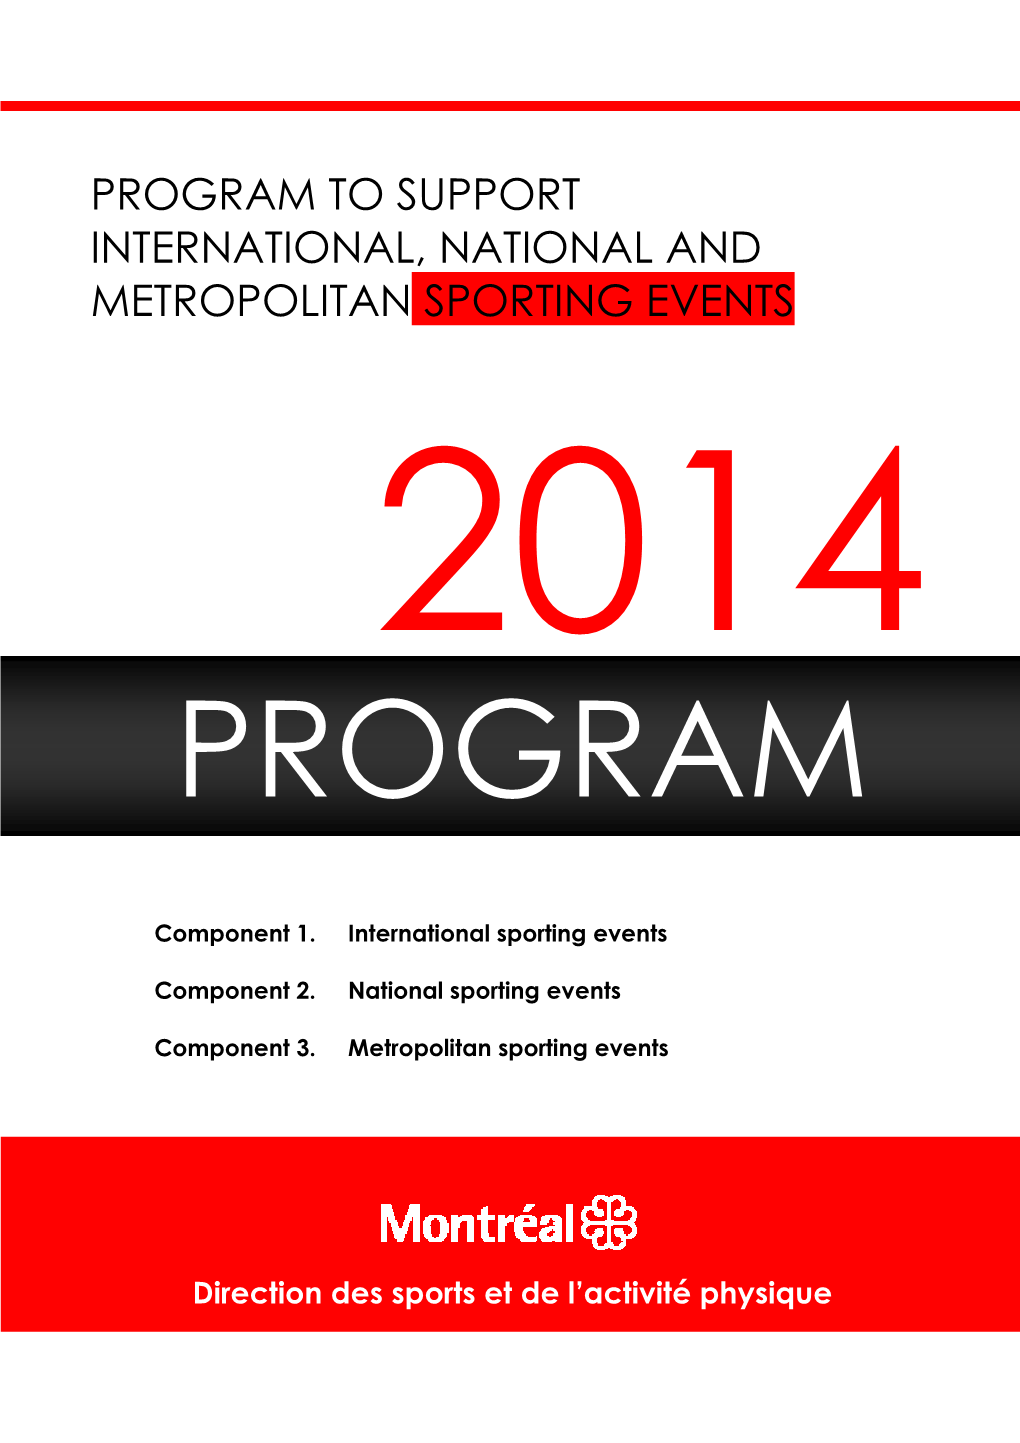 Program to Support International, National and Metropolitan Sporting Events